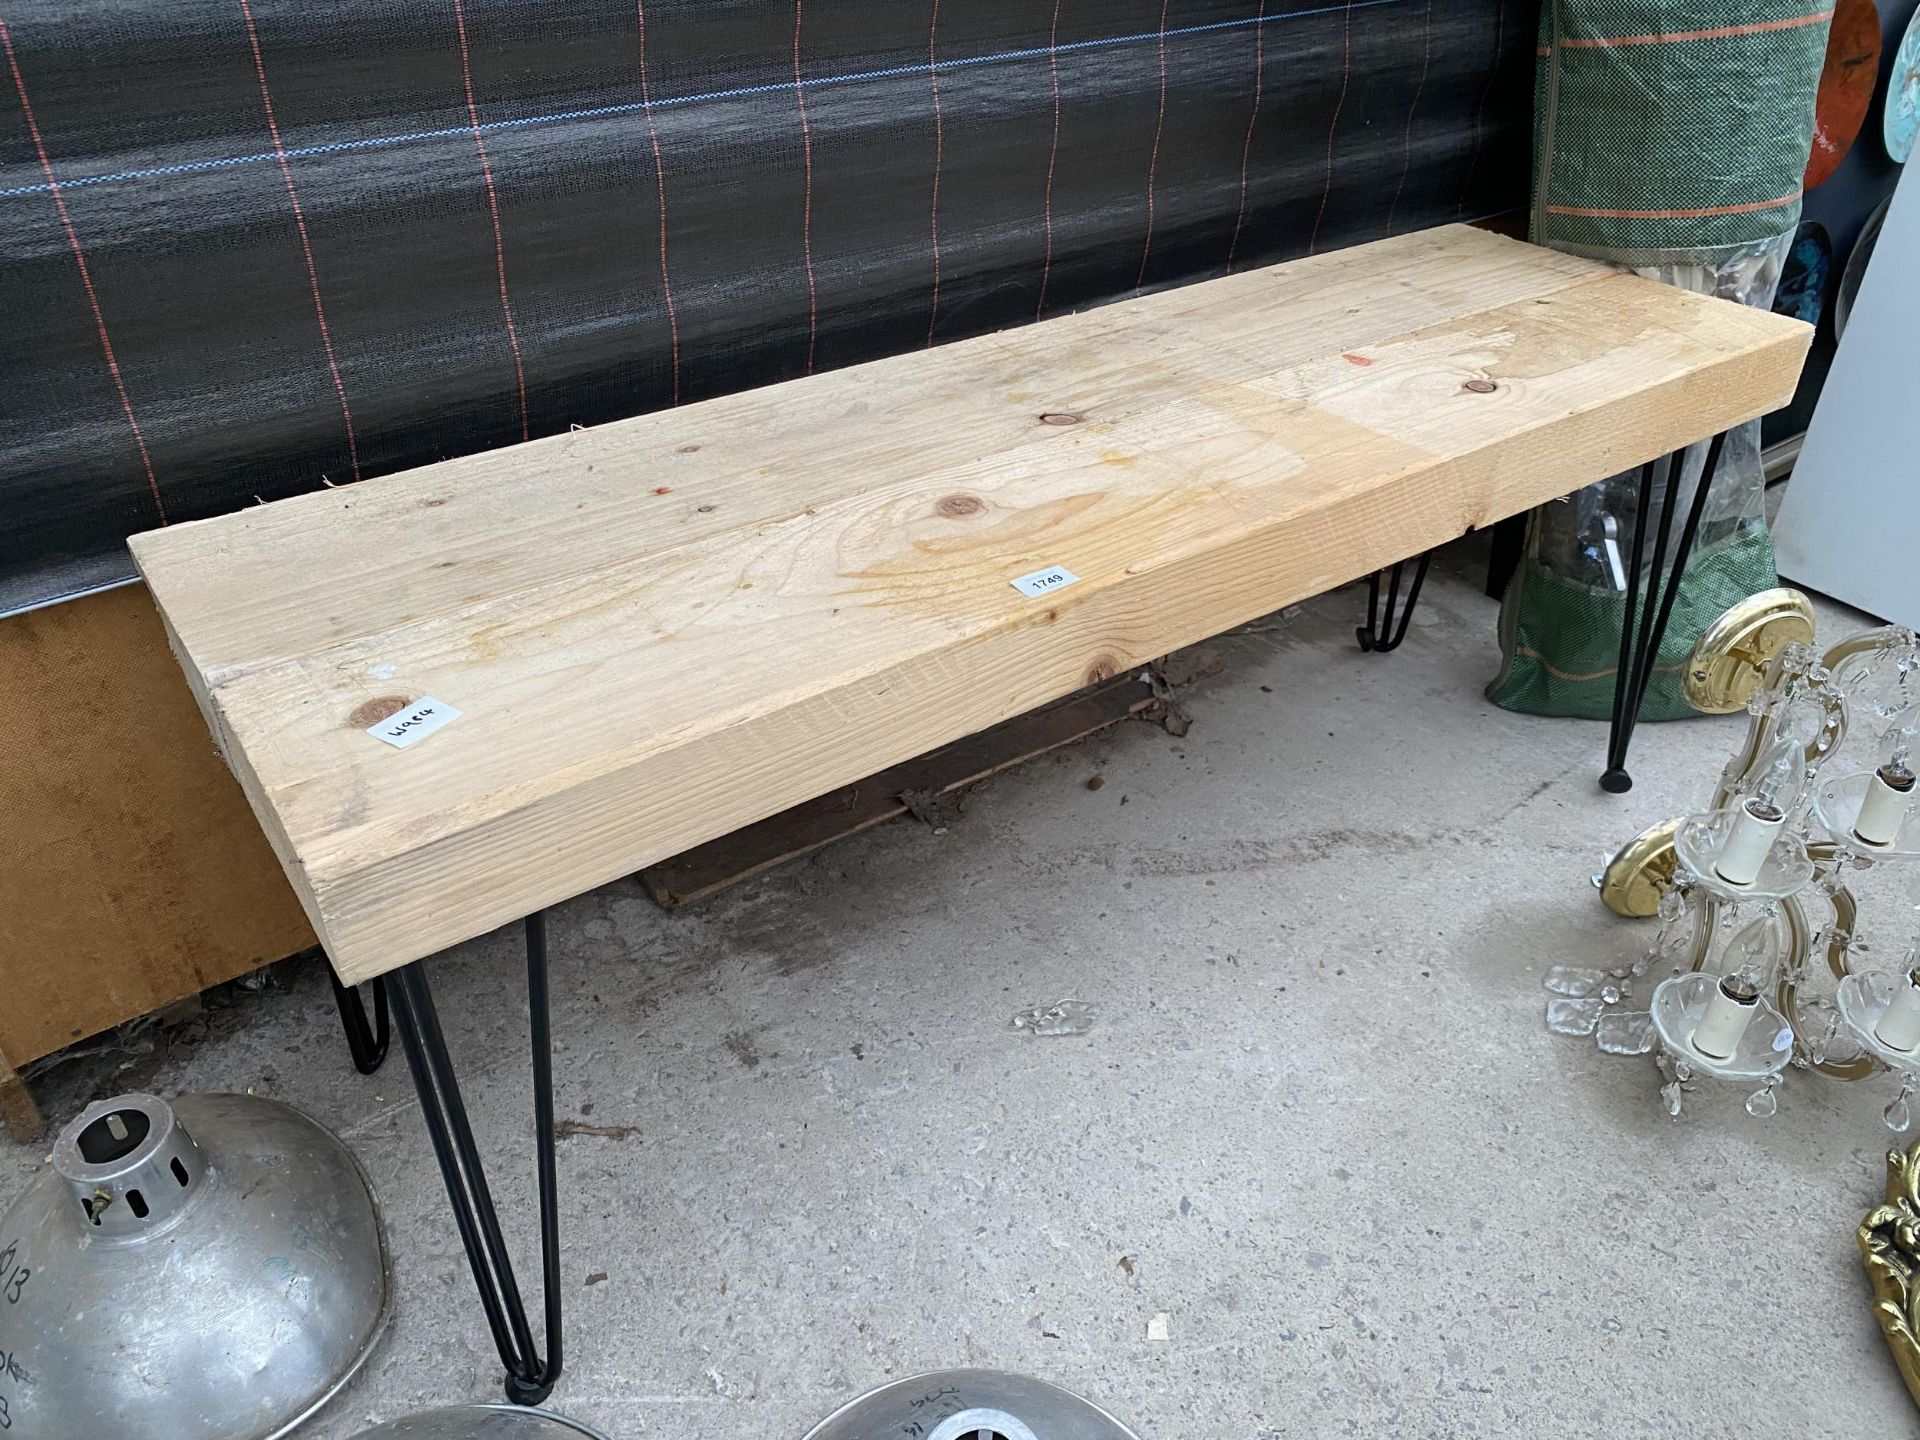 A WOODEN PLANK TOPPED BENCH WITH METAL LEGS